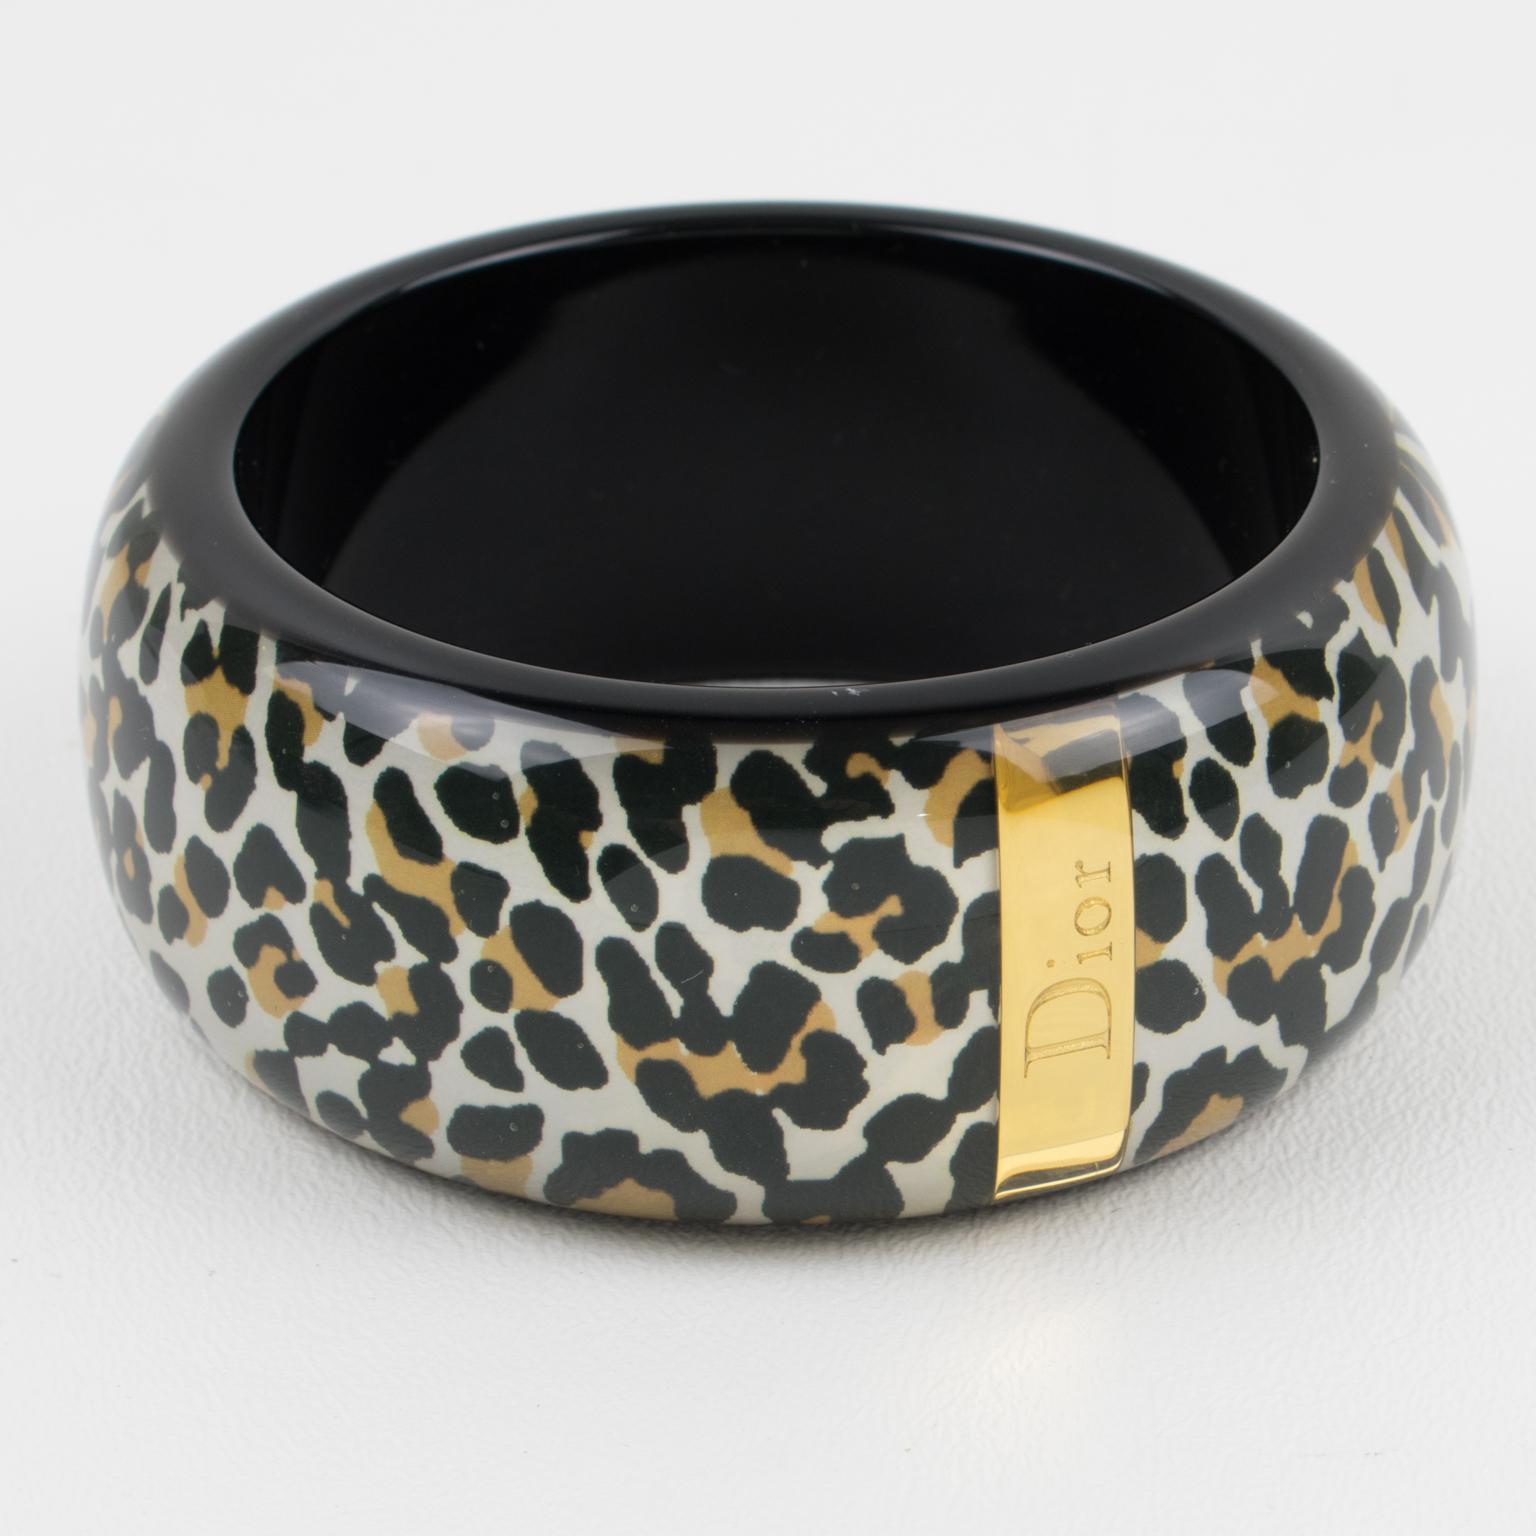 Elegant Christian Dior bracelet bangle. Resin, acrylic, or Lucite bracelet, with a black background and leopard pattern in white, black, and gold colors. Gilded metal stick with 